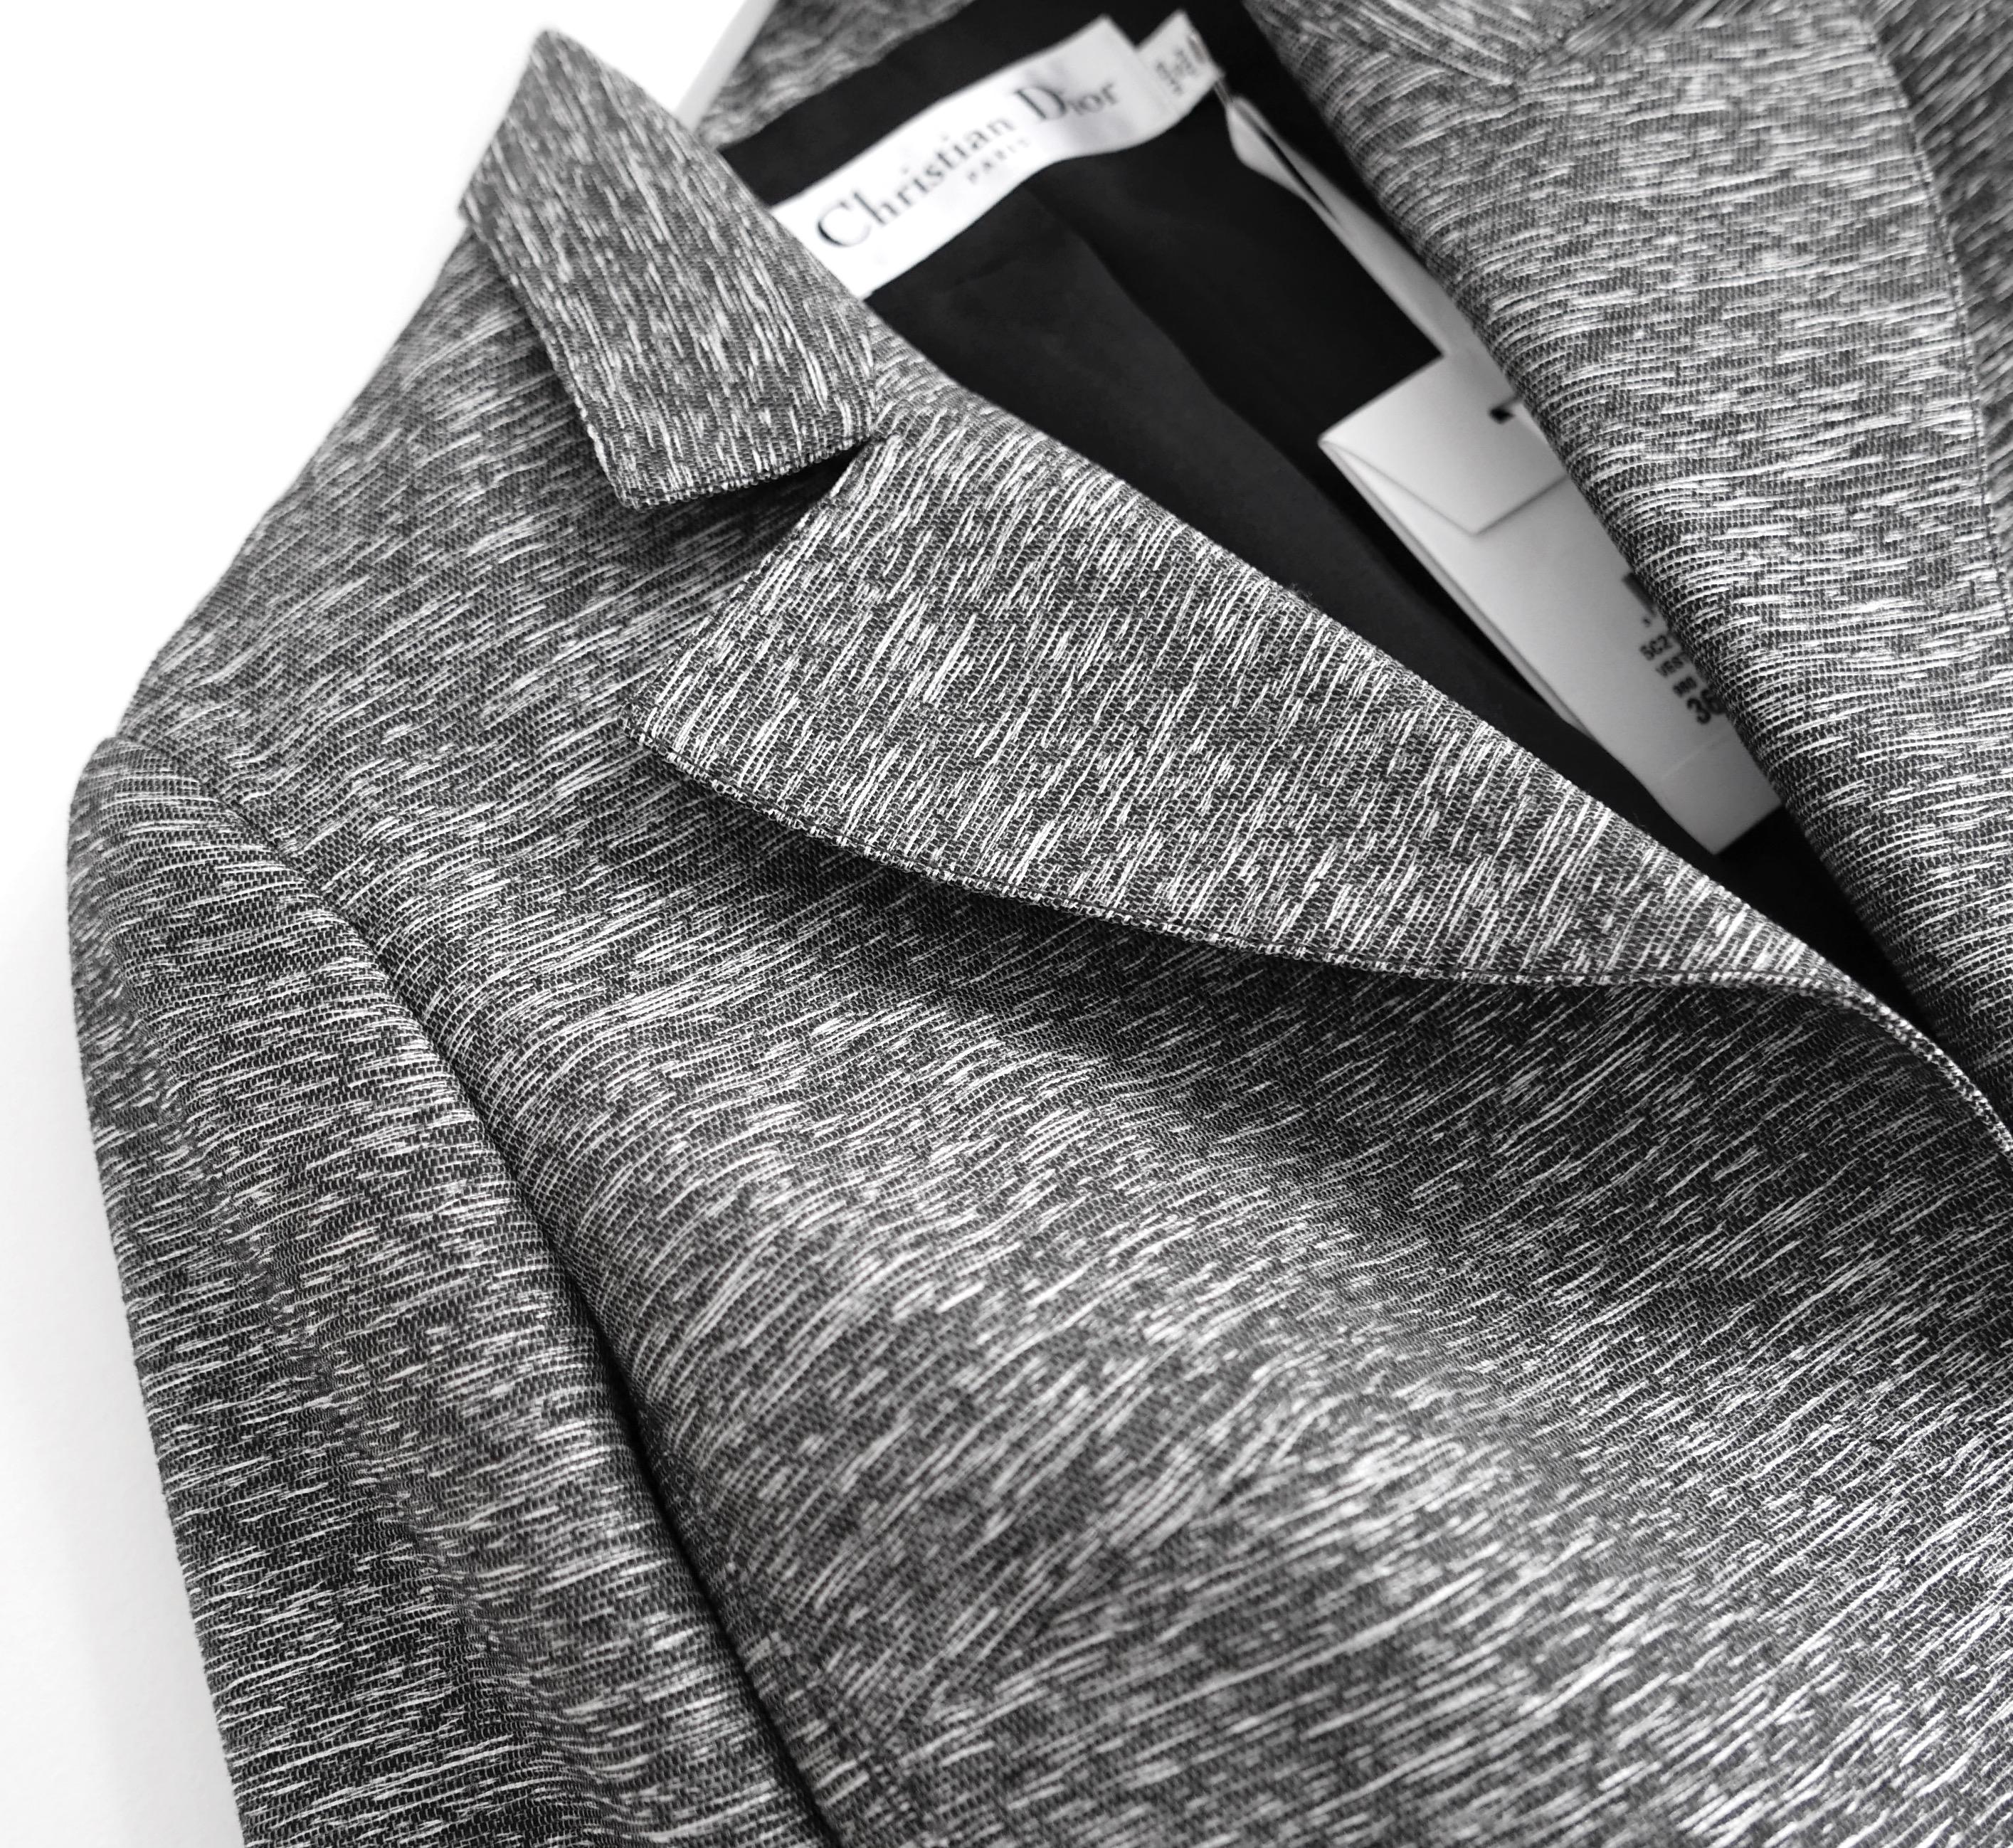 Dior x Raf Simons Resort 2015 Grey Textured Crop Blazer Jacket In New Condition For Sale In London, GB